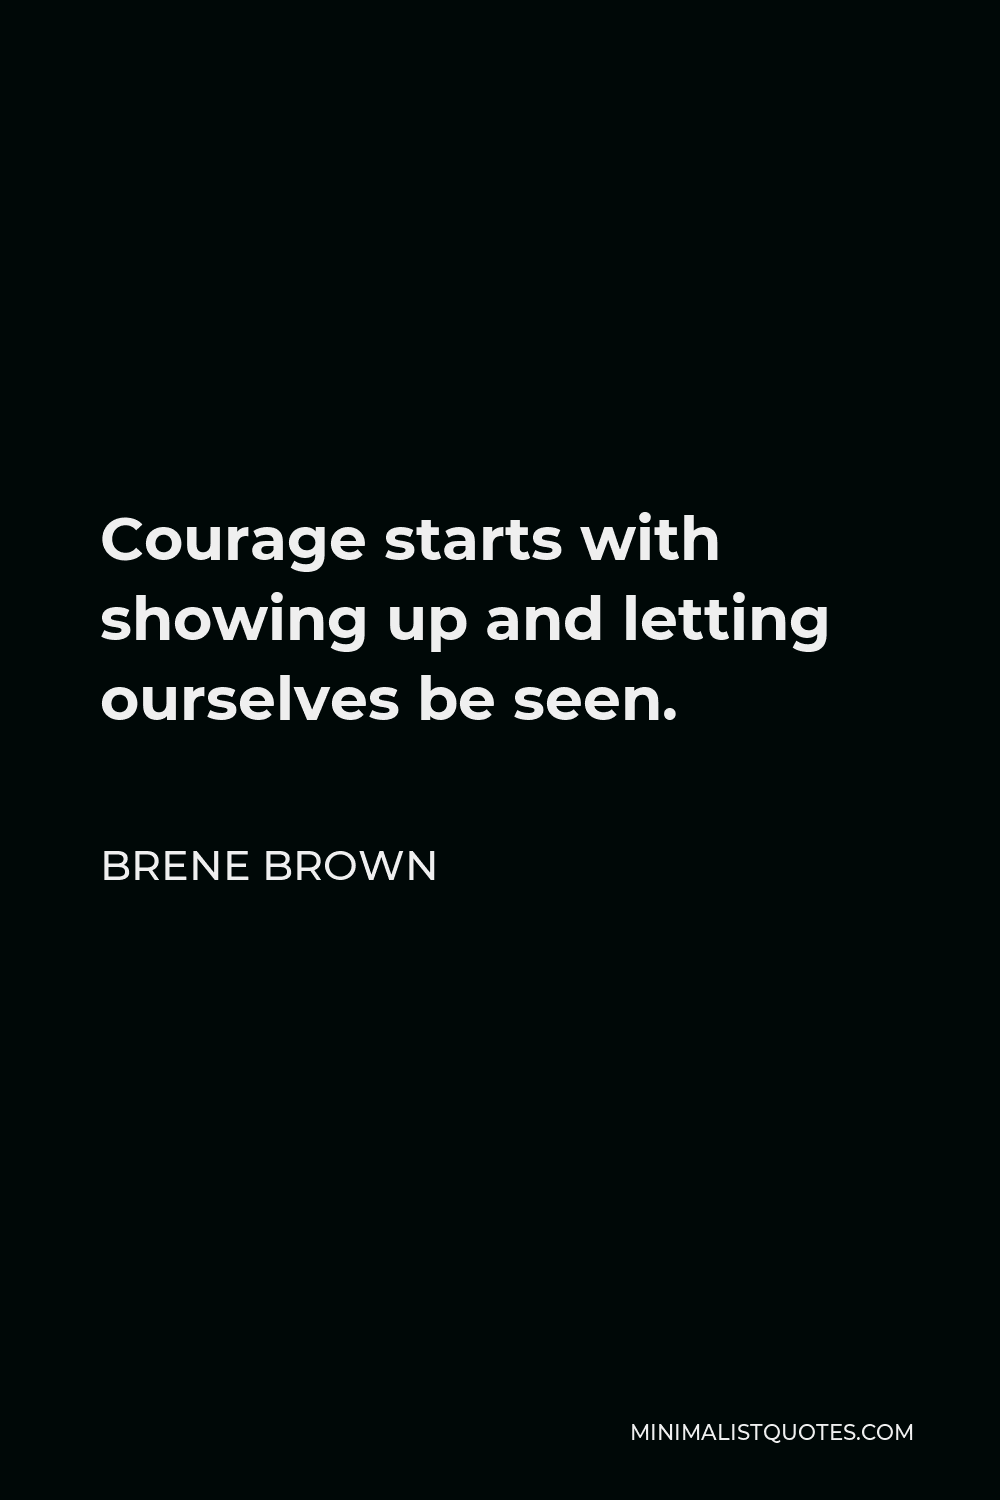 Brene Brown Quote - Courage starts with showing up and letting ourselves be seen.